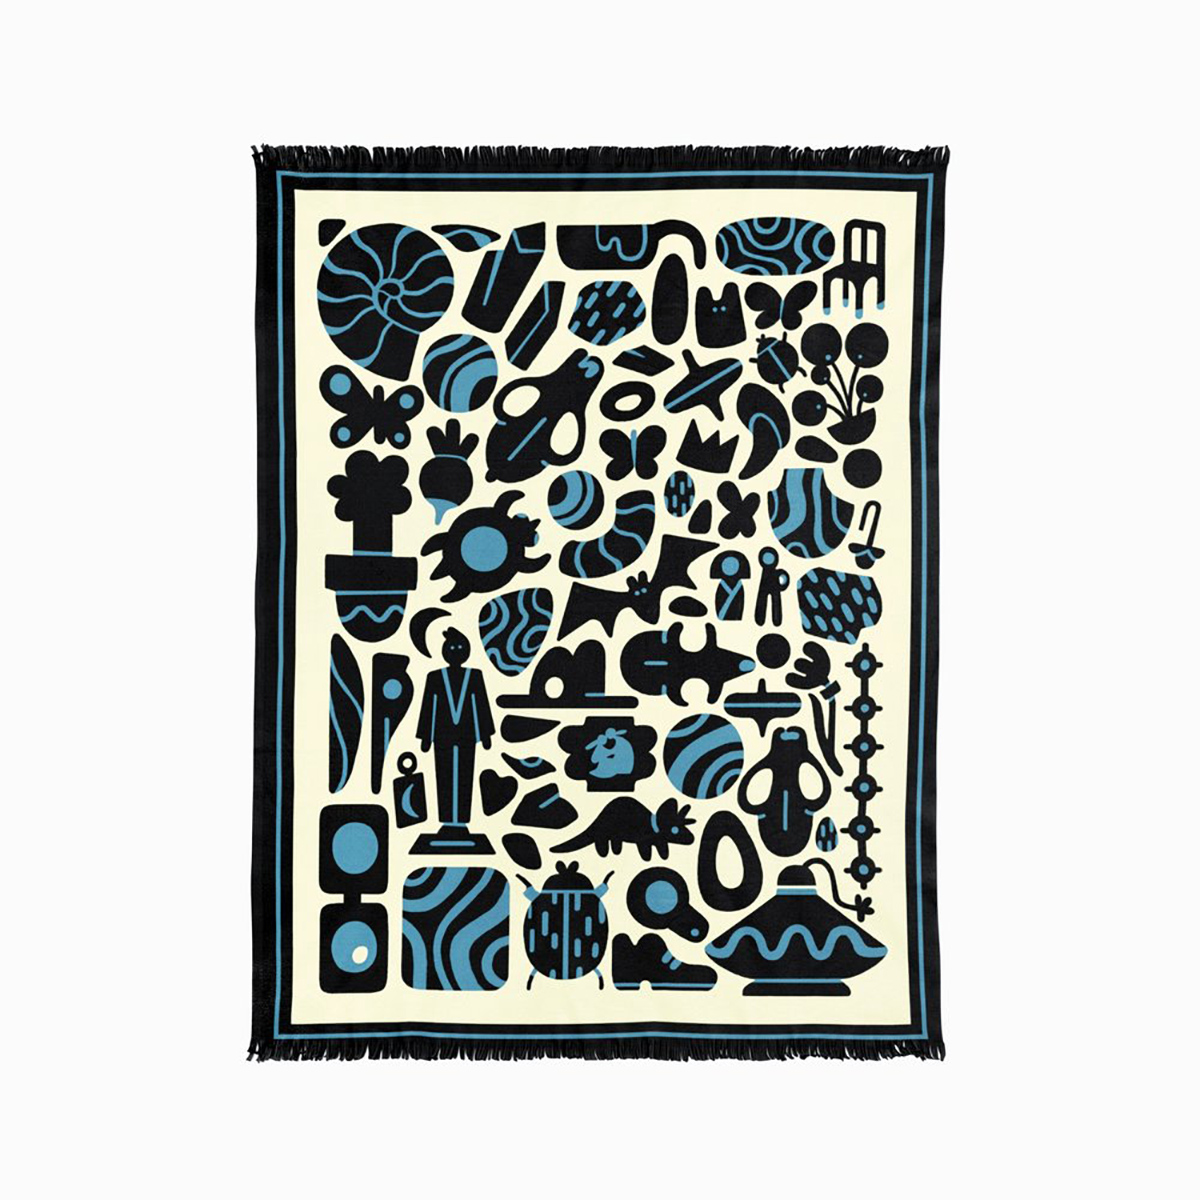 Large throw blanket with graphic illustrated pattern printed on it of various artifacts and icons arranged tightly